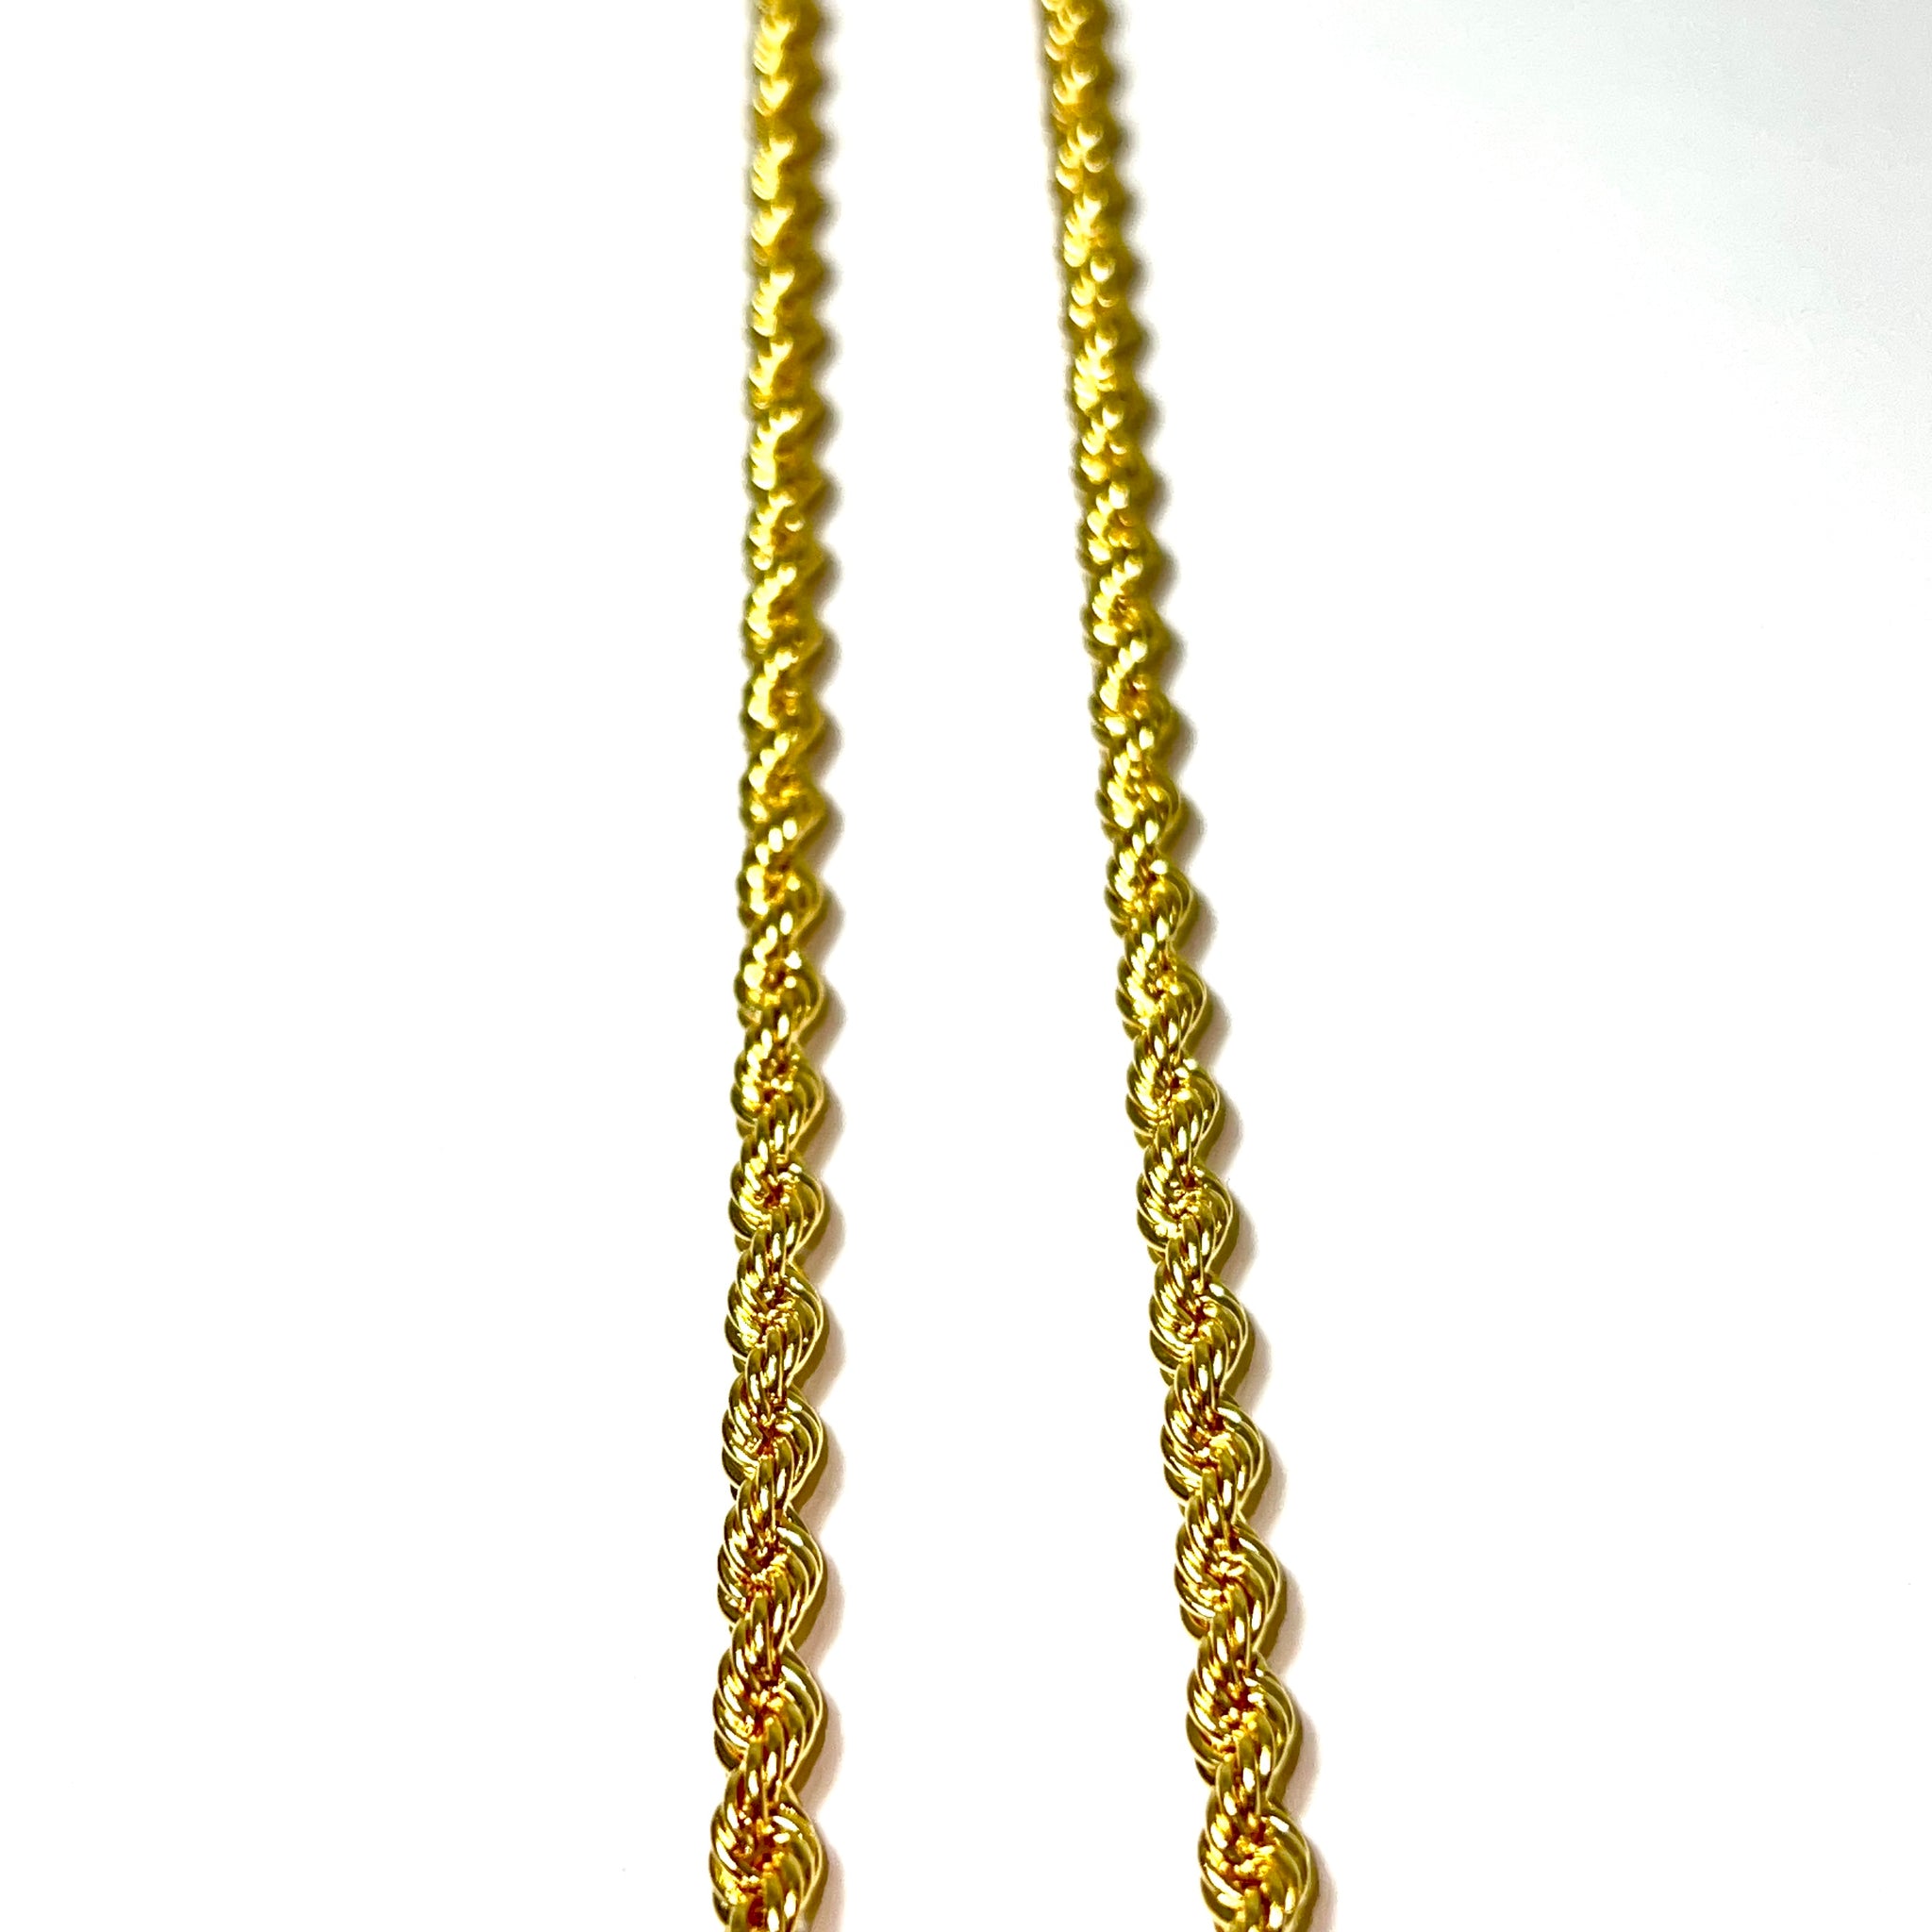 Rope Chain - 14 Carat Gold - 65cm / 4,5mm - 447